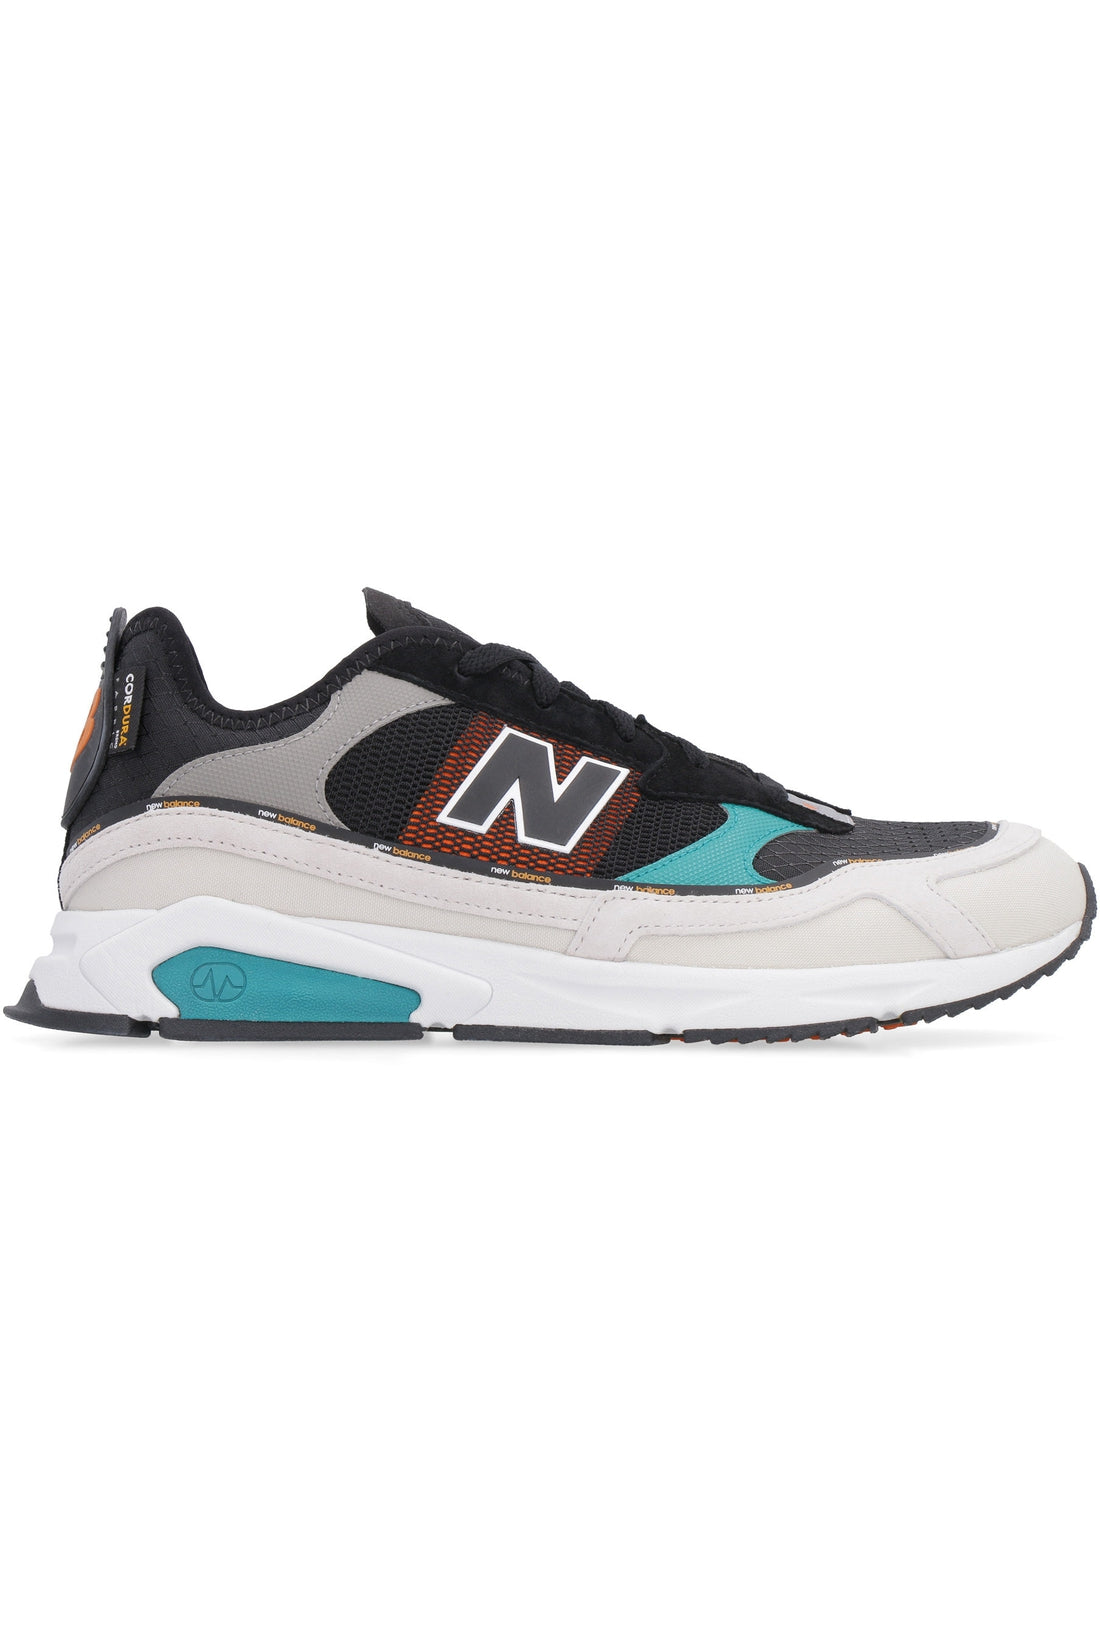 New Balance-OUTLET-SALE-X-Racer mesh sneakers-ARCHIVIST